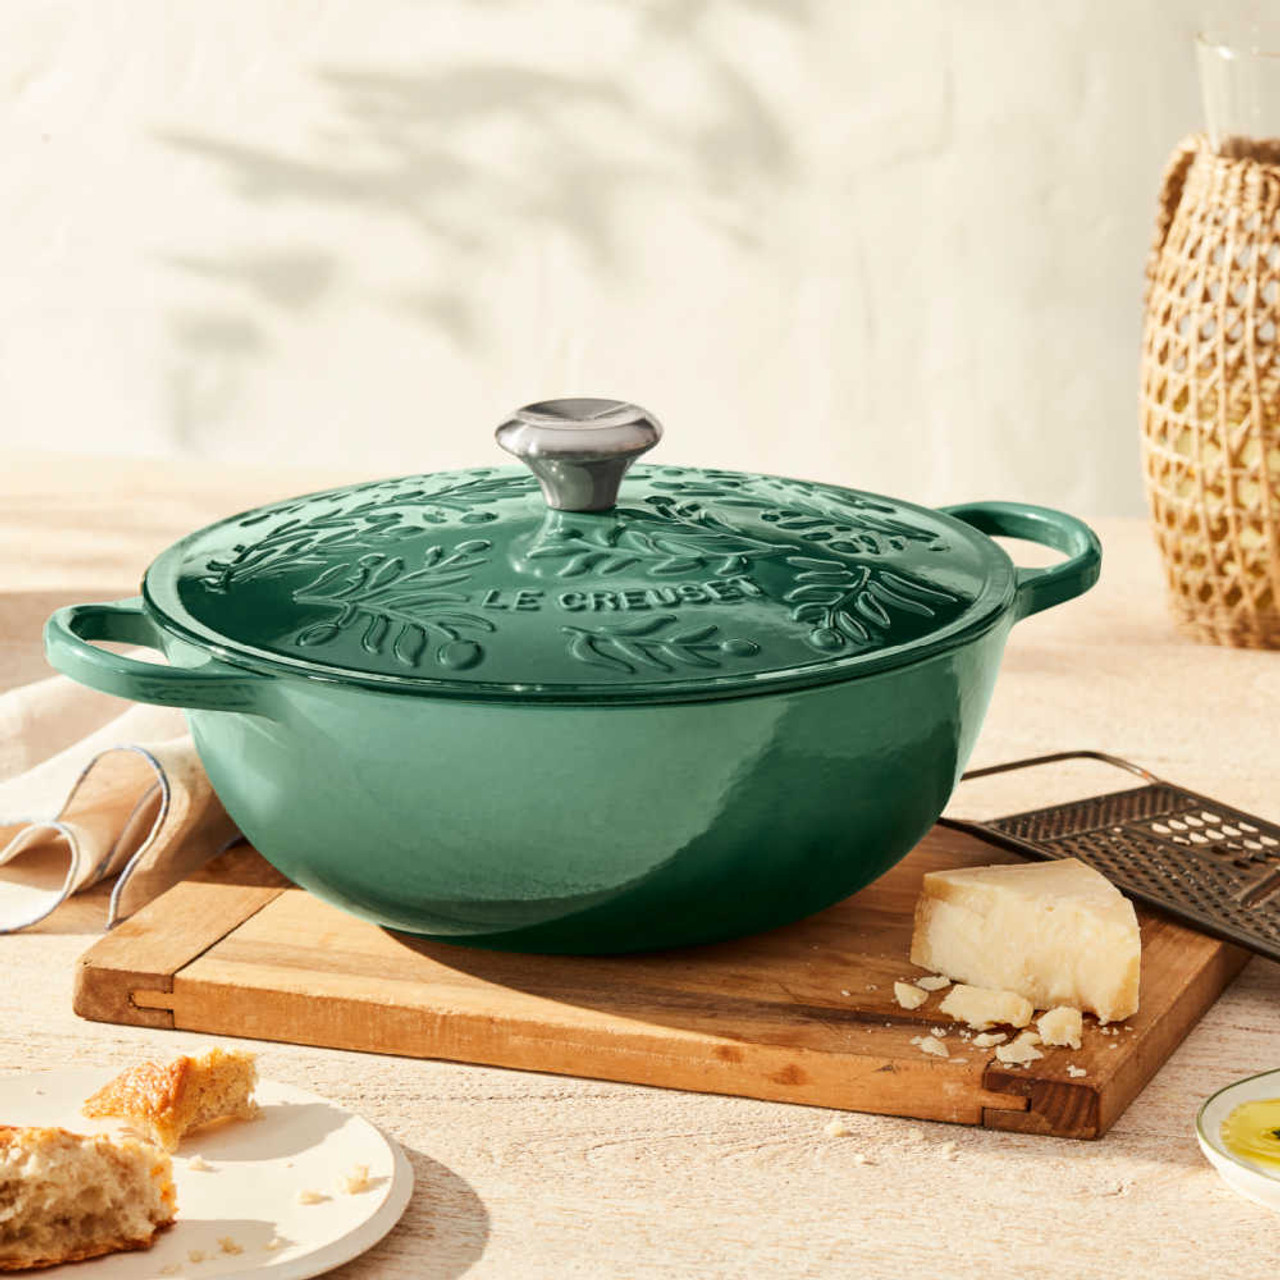 https://cdn11.bigcommerce.com/s-hccytny0od/images/stencil/1280x1280/products/4937/20949/Le_Creuset_Olive_Branch_Collection_Soup_Pot_in_Artichaut_1__24840.1659491215.jpg?c=2?imbypass=on